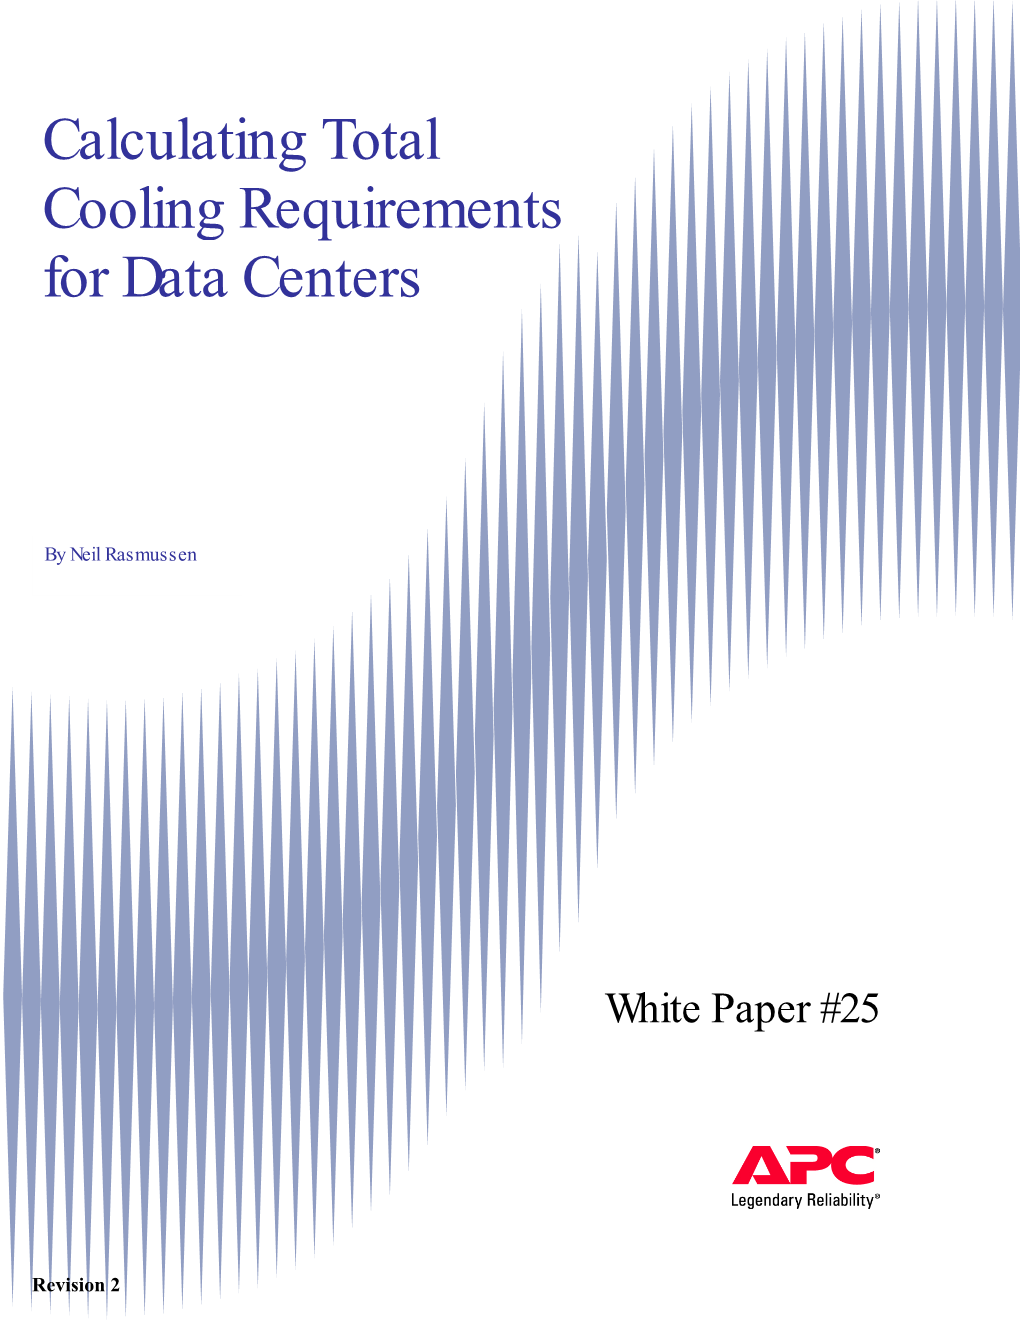 Calculating Total Cooling Requirements for Data Centers